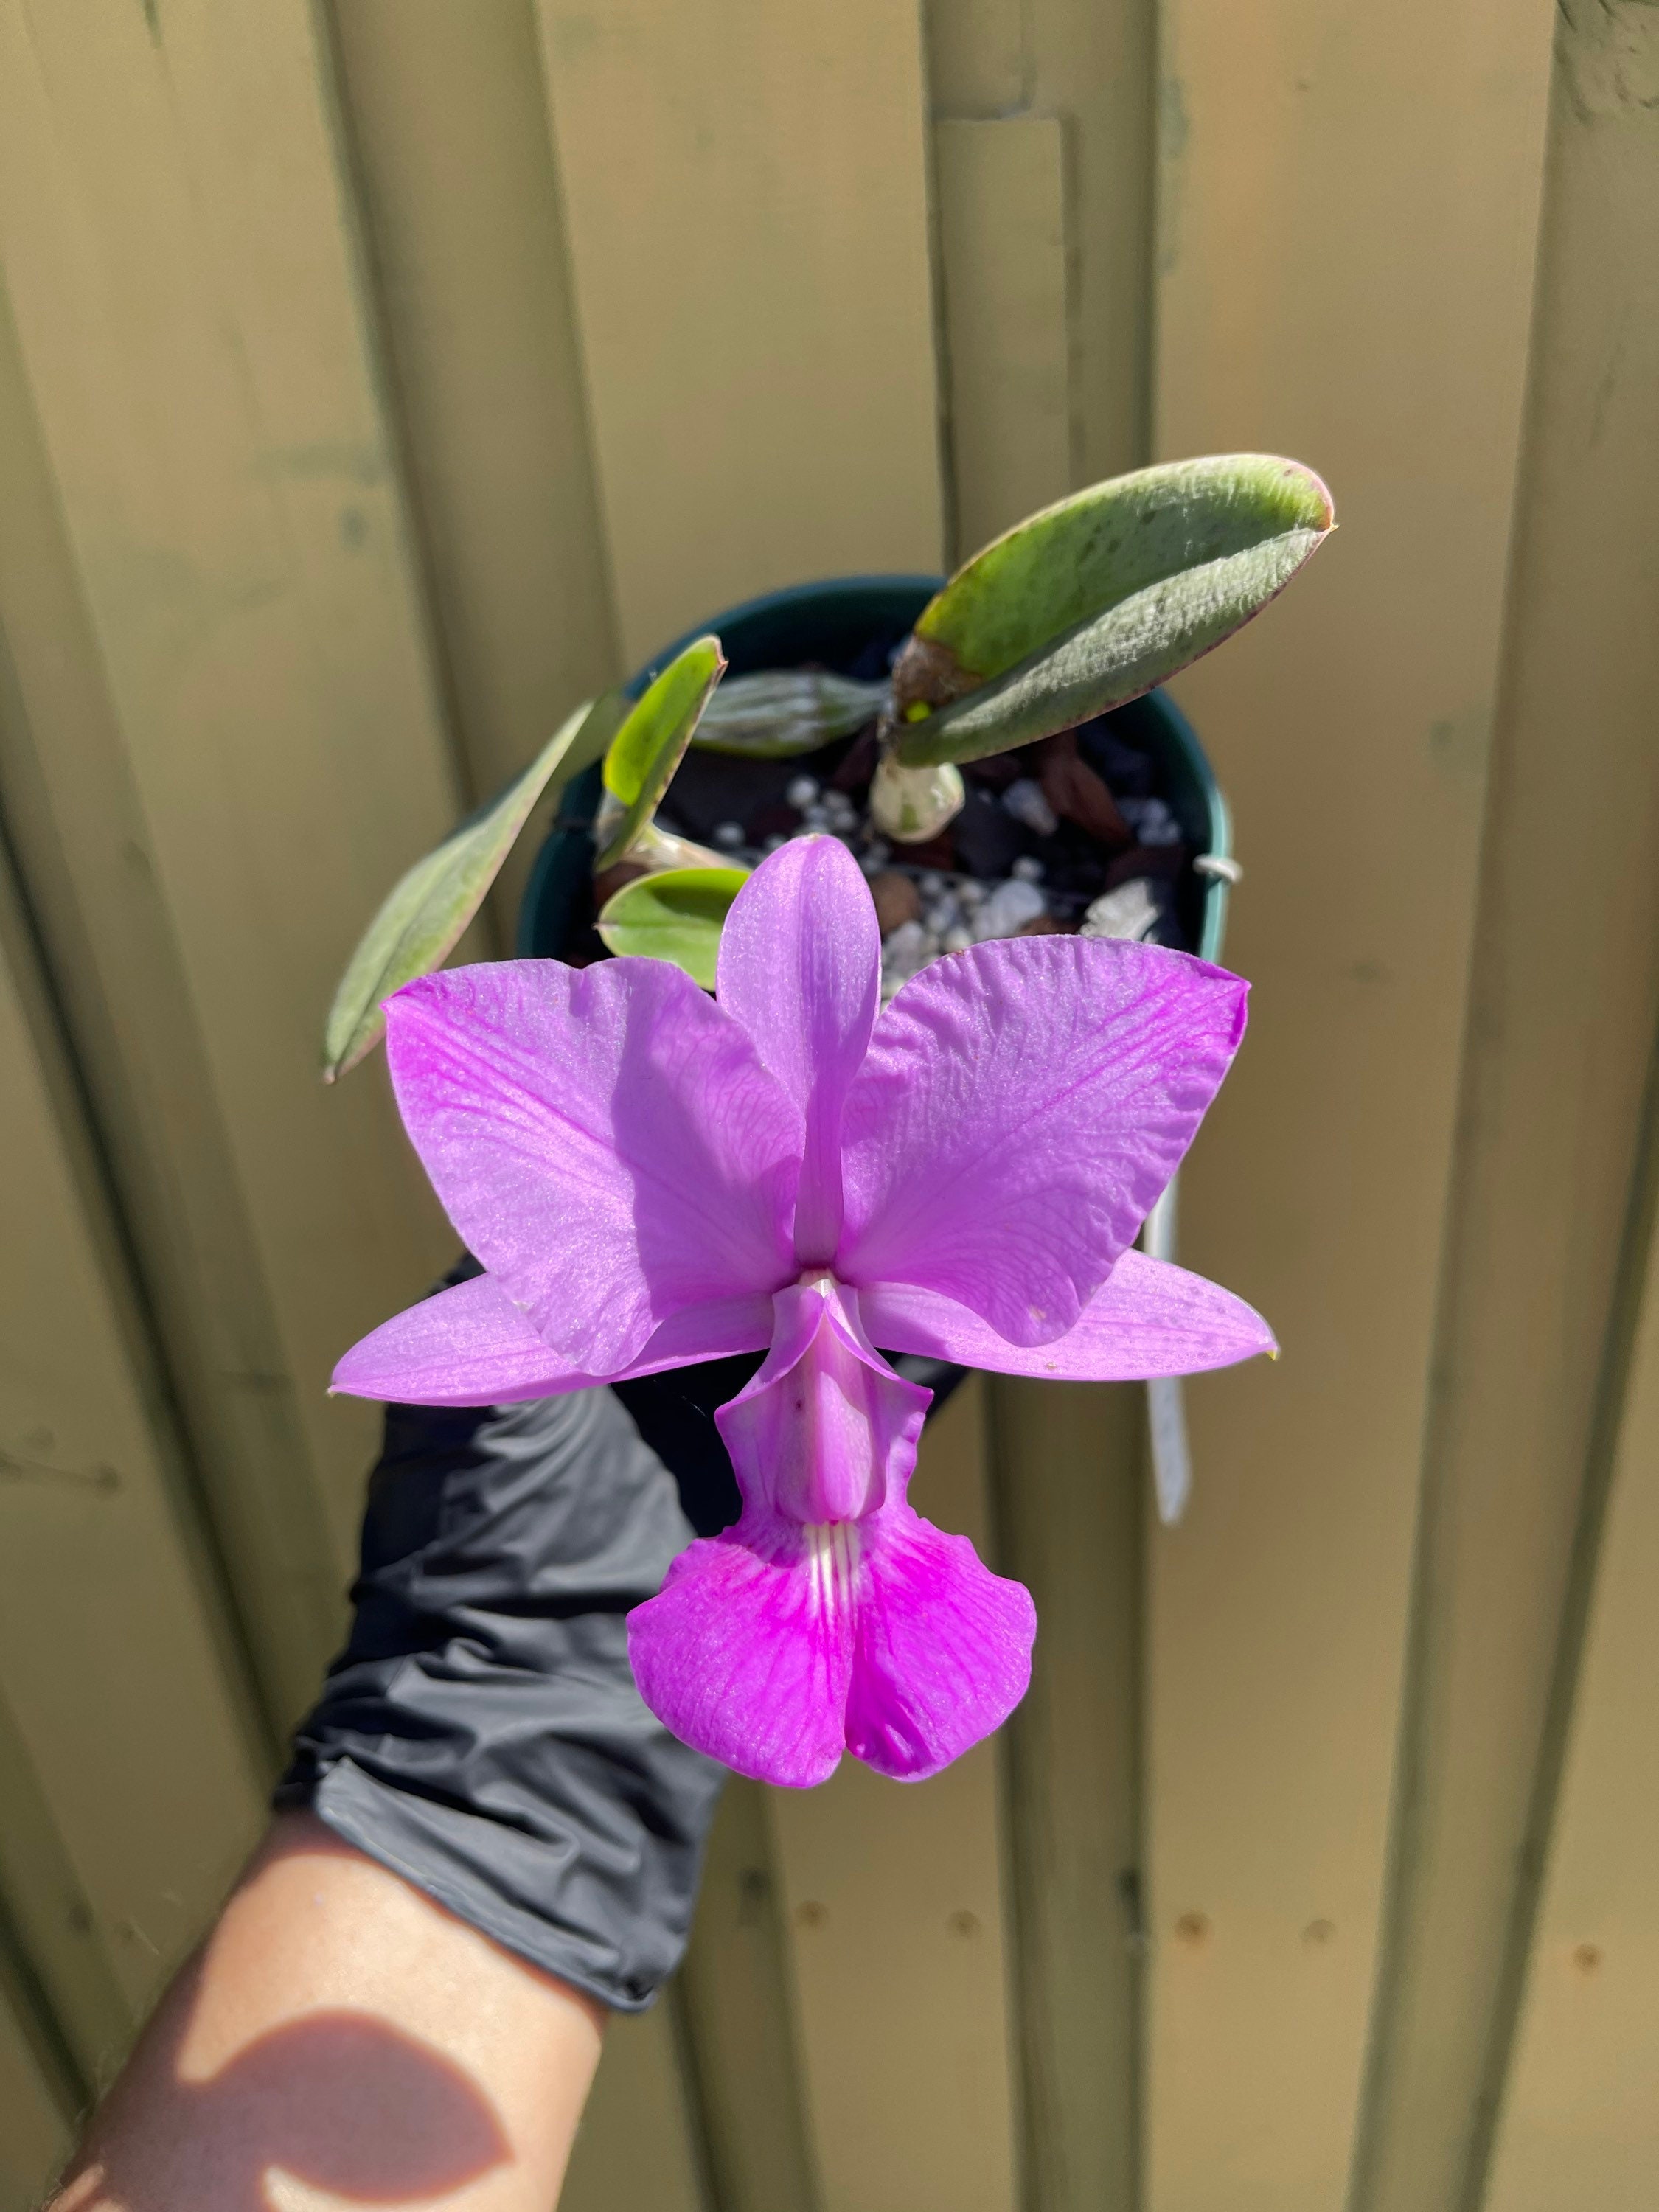 Eplc. Jackie Bright 'Hilo Stars' (Lc. Gold Digger x Epi. randii) : r/orchids